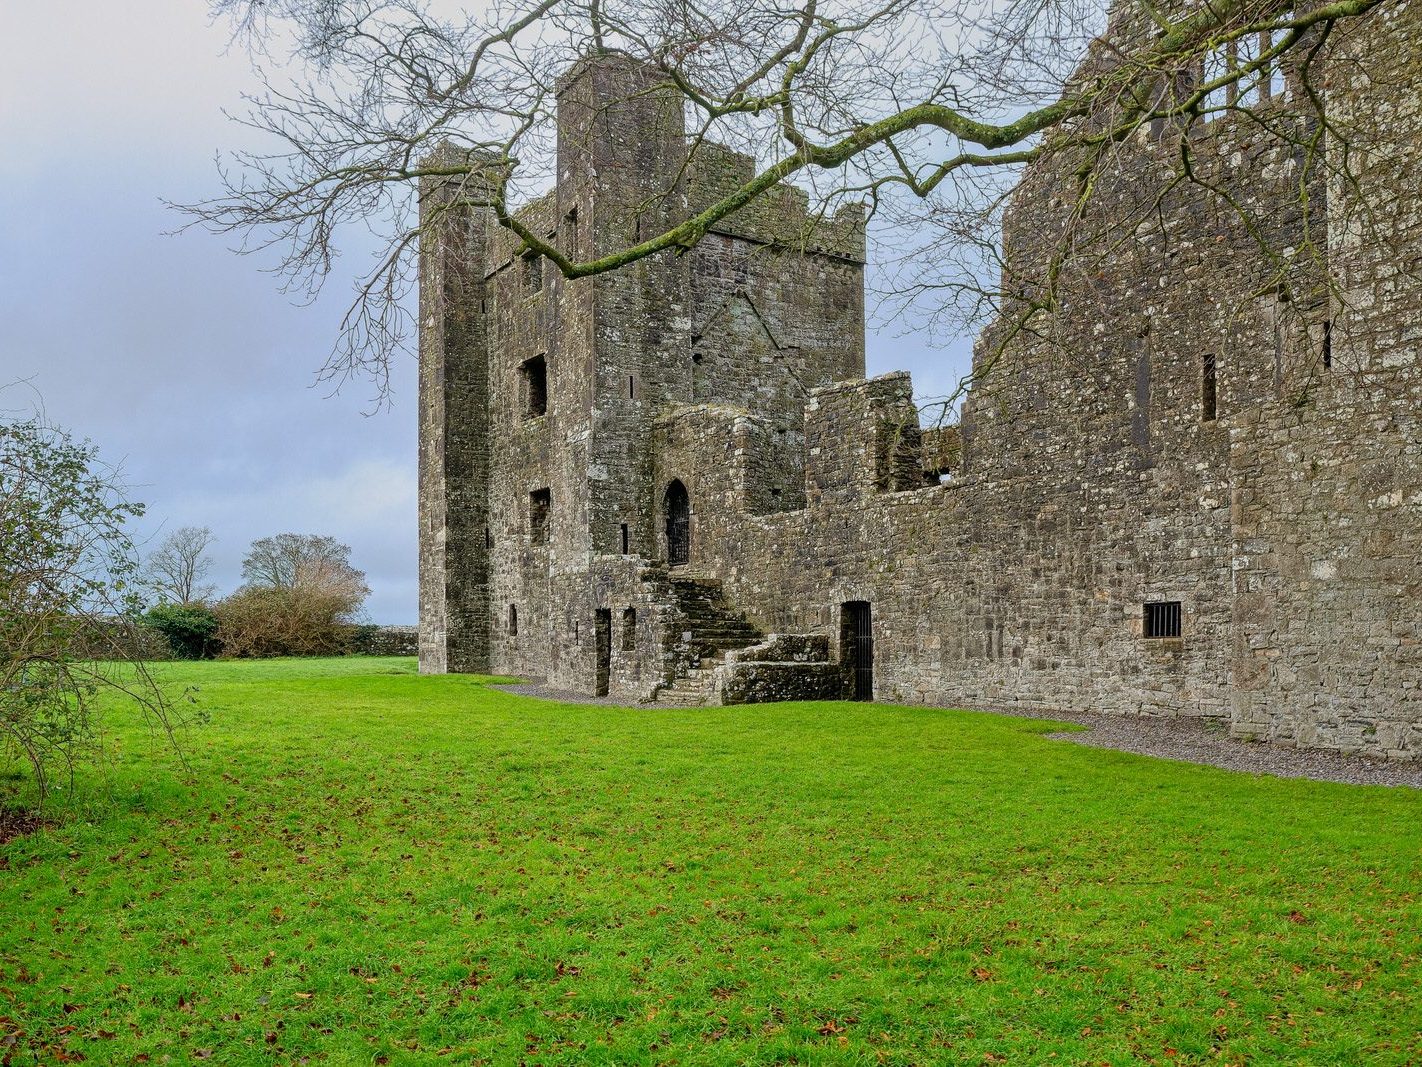 BECTIVE ABBEY WHICH I VISITED LAST CHRISTMAS [THERE WERE NO OTHER VISITORS AS IT WAS A VERY WET DAY]--225213-1